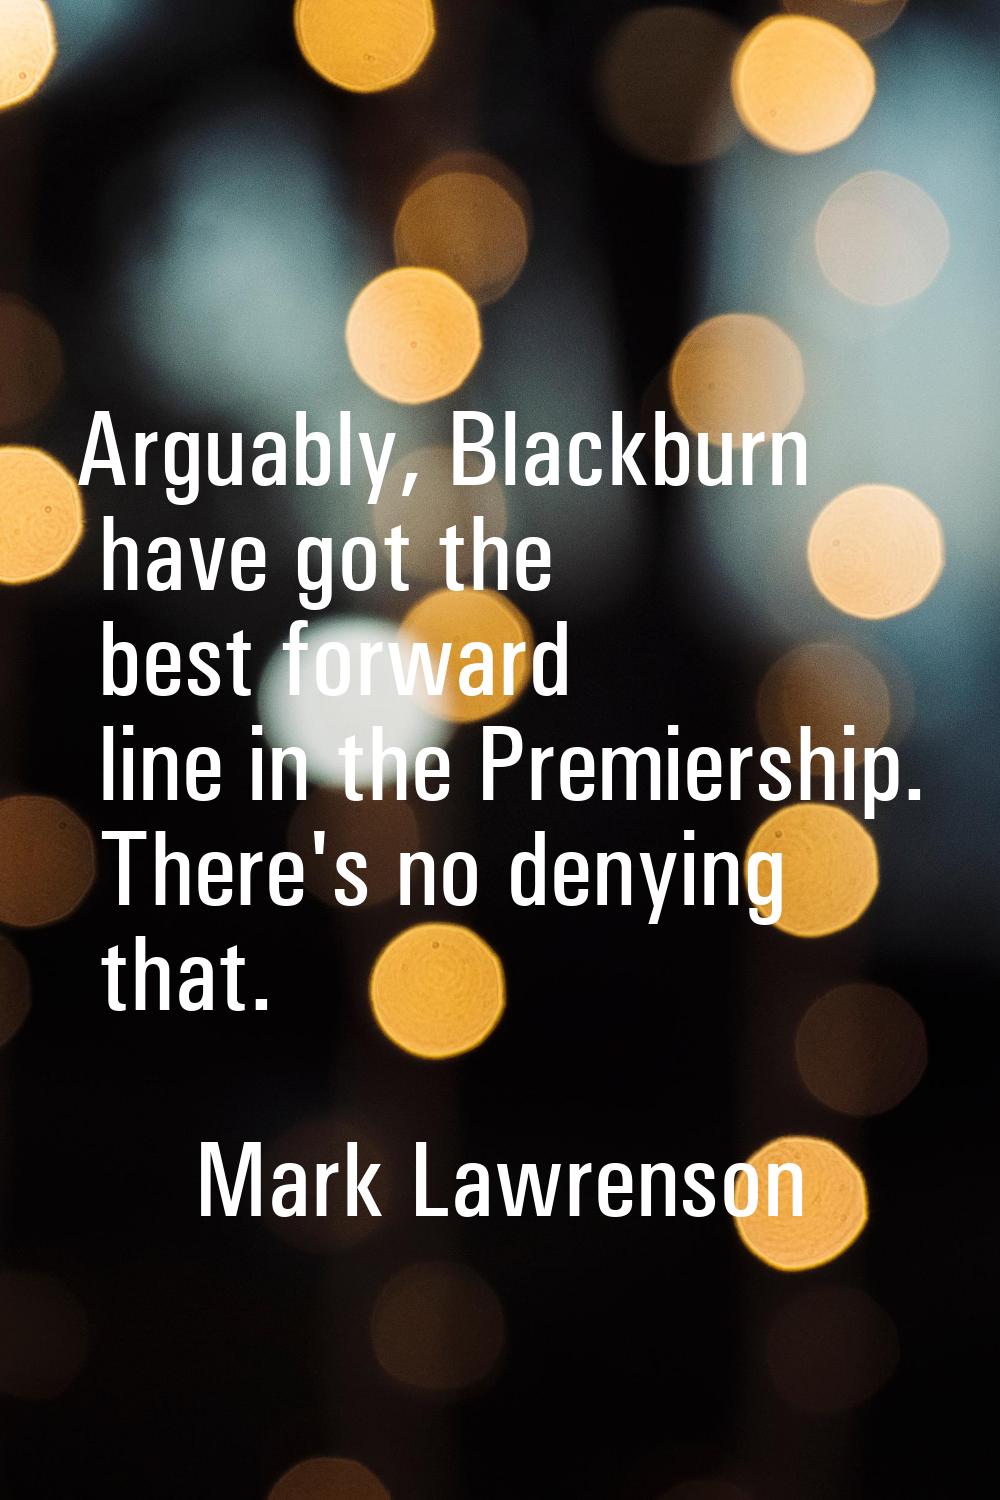 Arguably, Blackburn have got the best forward line in the Premiership. There's no denying that.